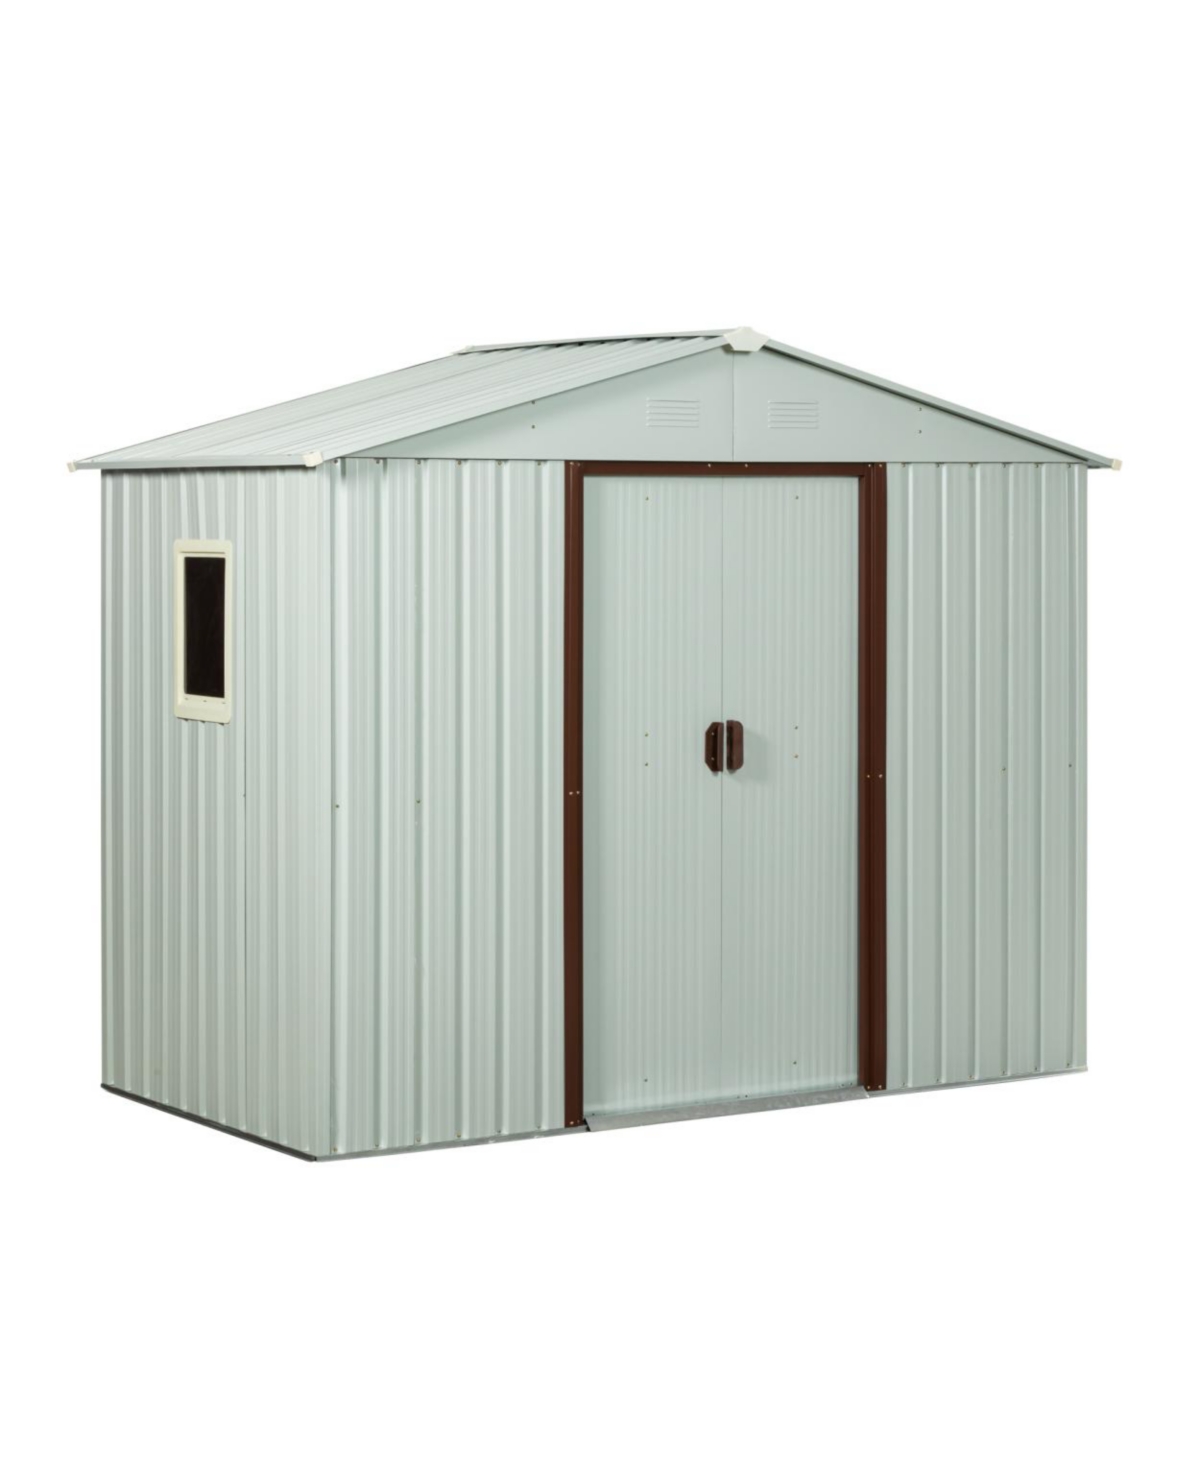 6FT X 5FT Outdoor Metal Storage Shed With Window White - White